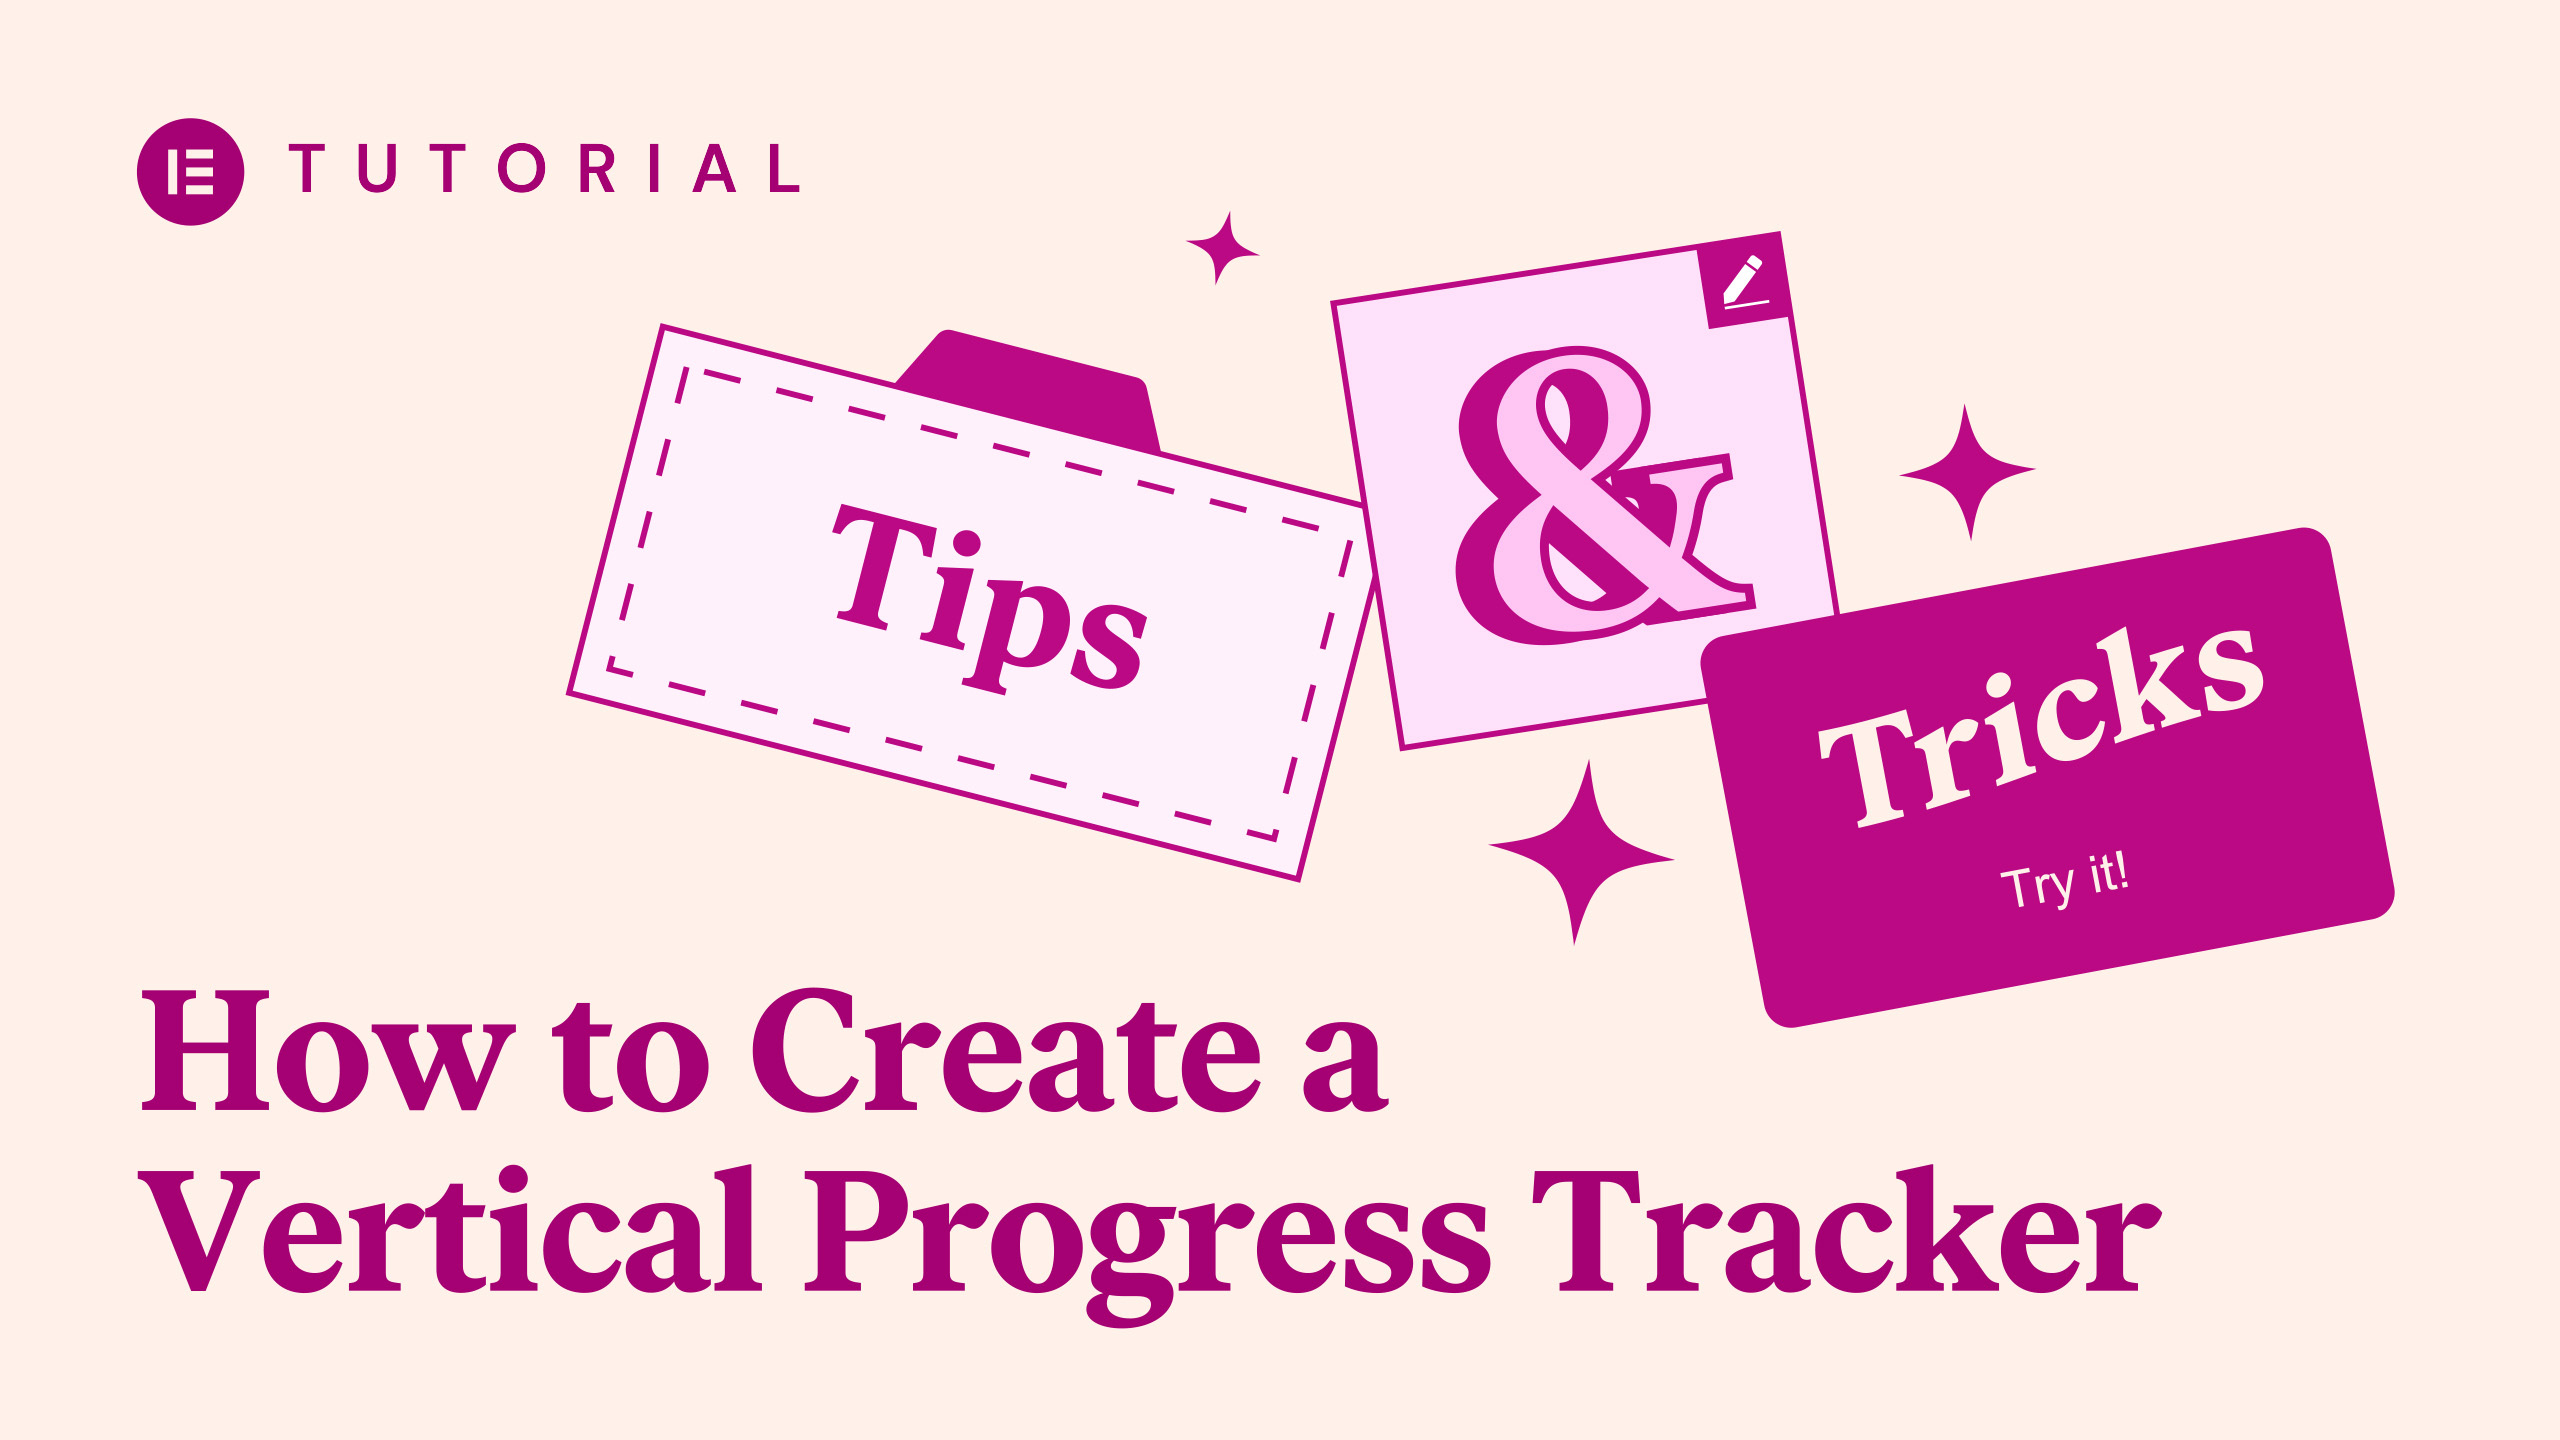 How to Create a Vertical Progress Tracker